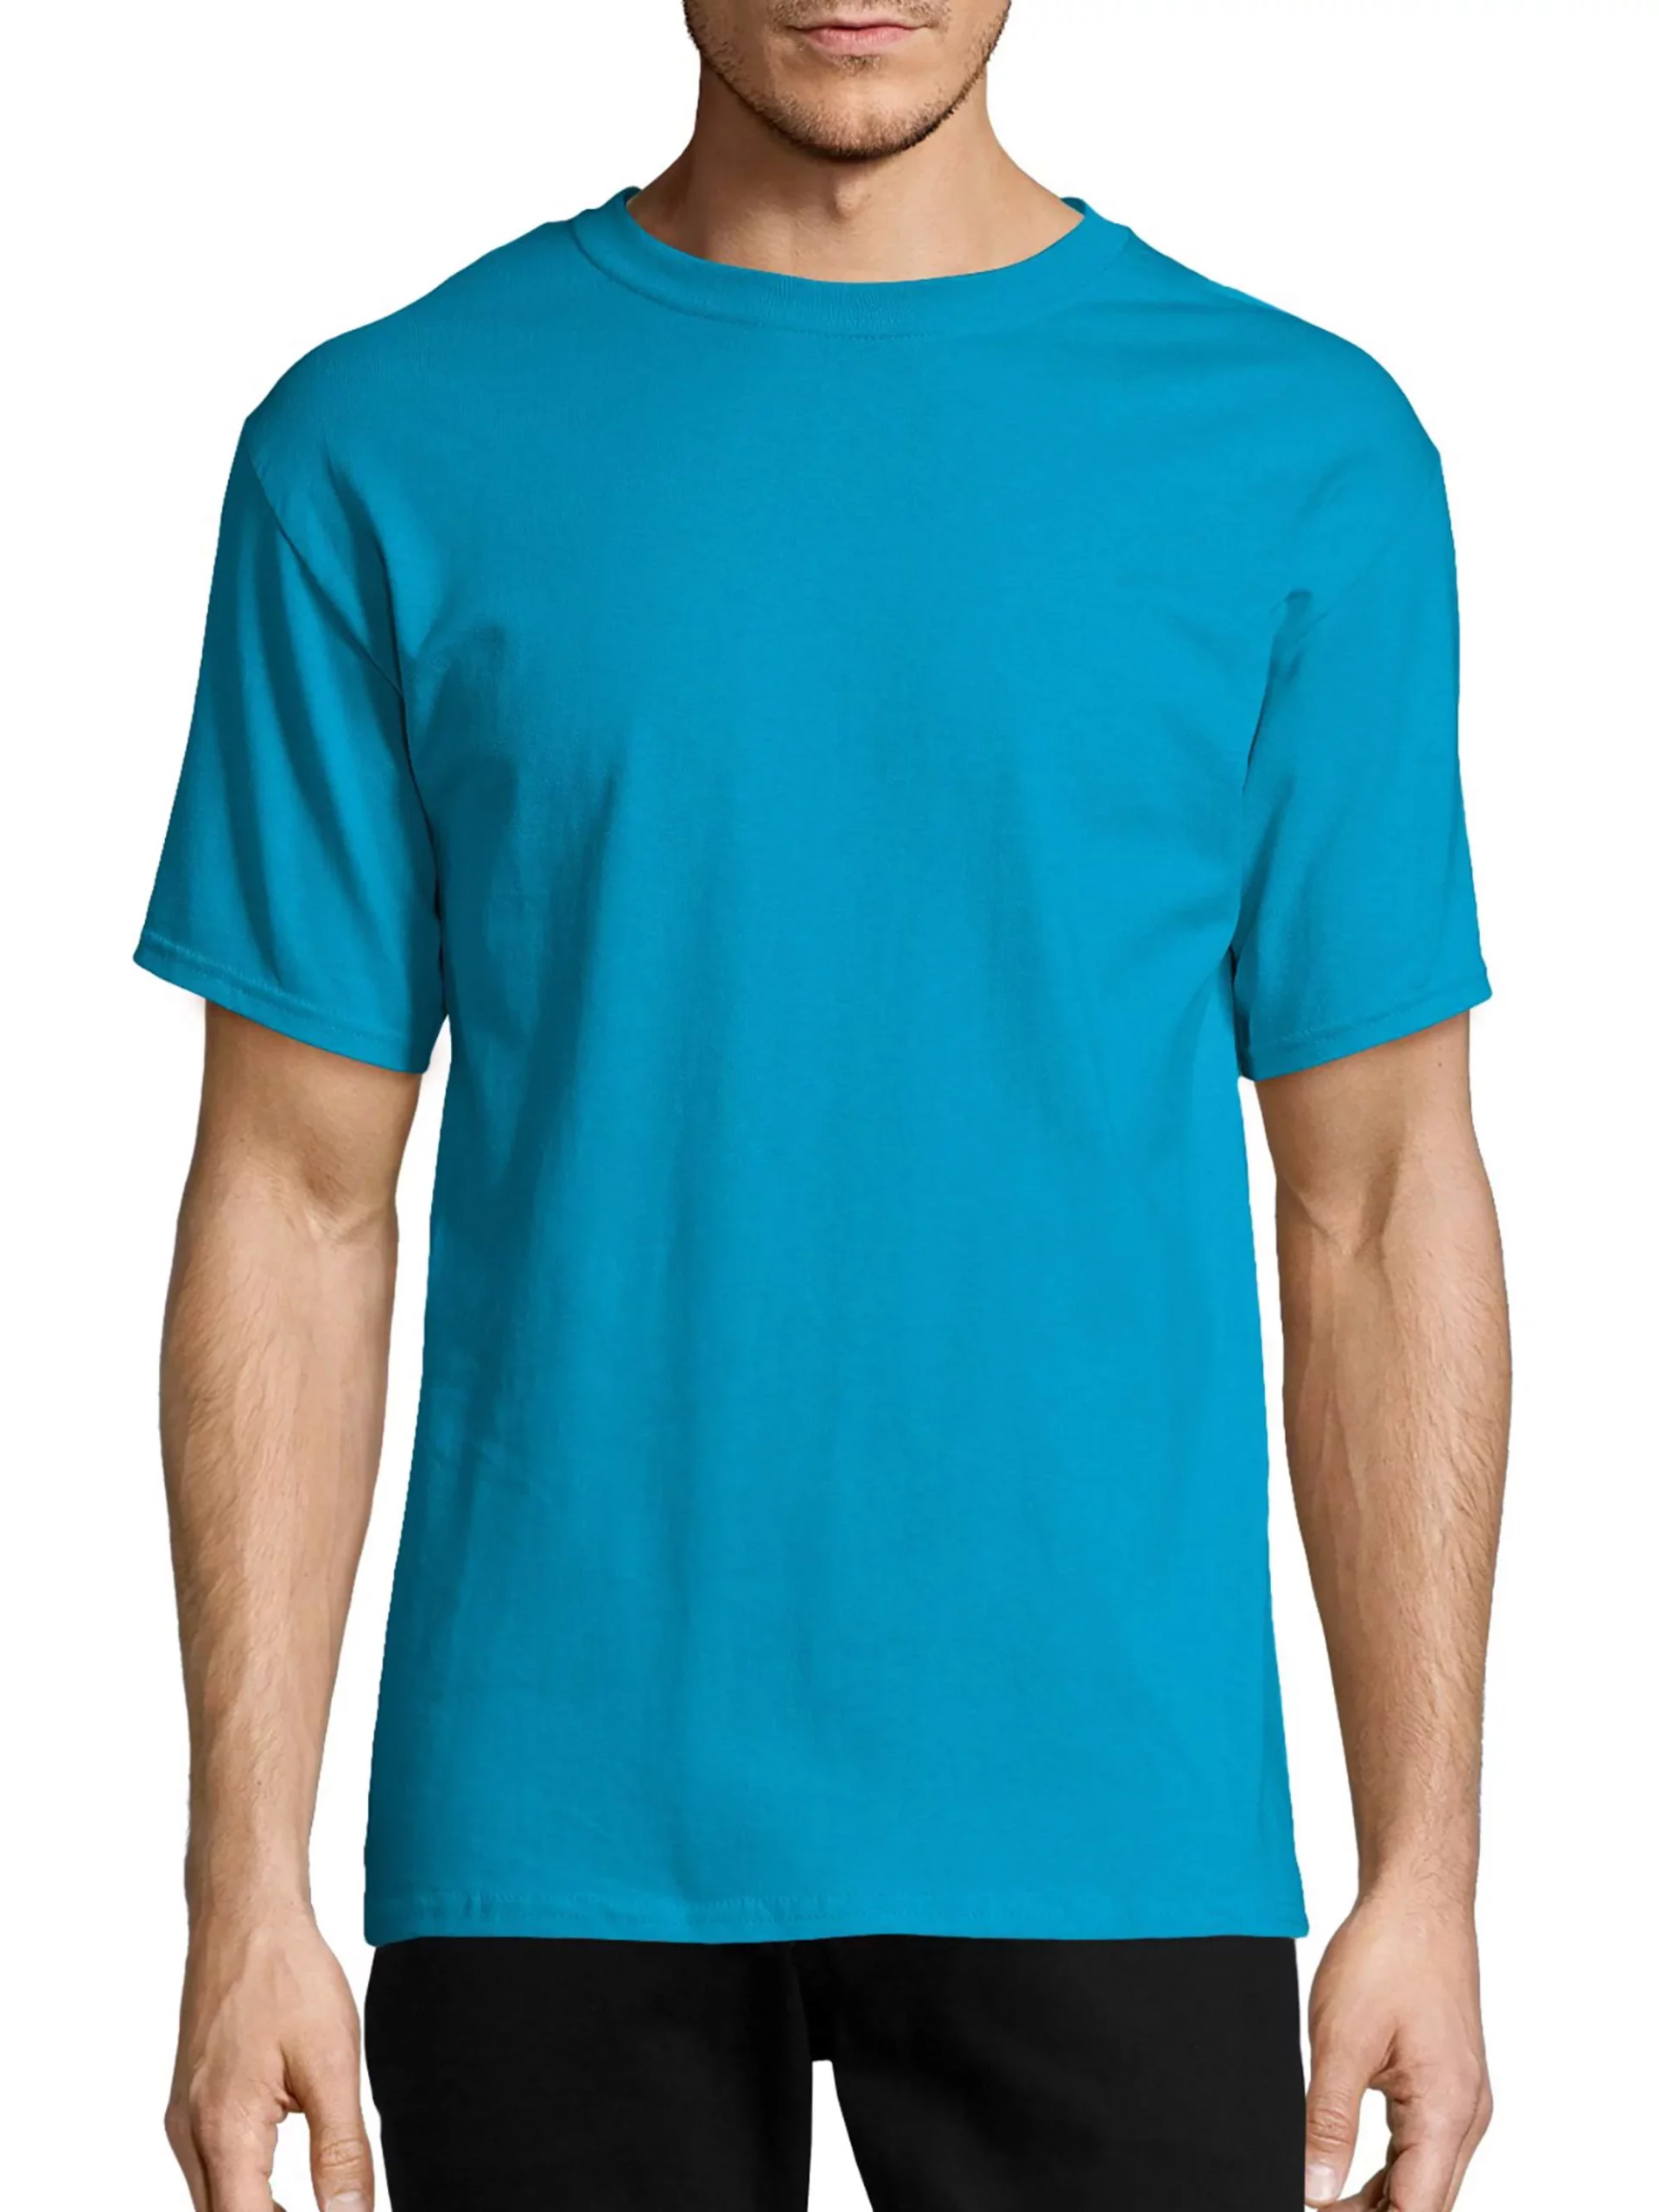 Hanes Men's Authentic Short Sleeve Tee: Unleashing Unmatched Comfort and Timeless Appeal